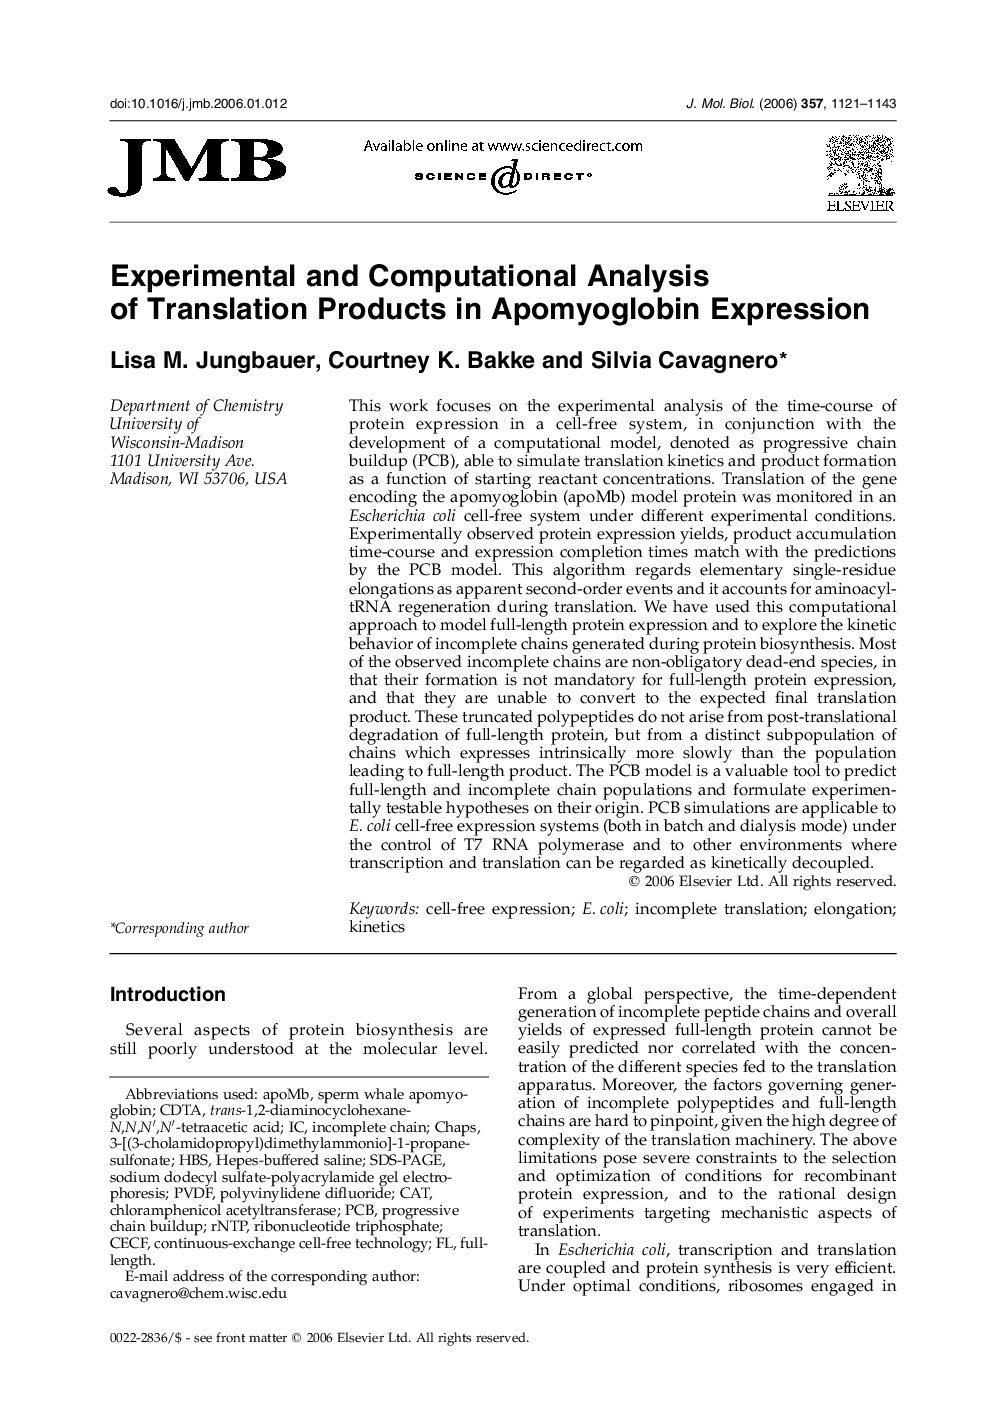 Experimental and Computational Analysis of Translation Products in Apomyoglobin Expression